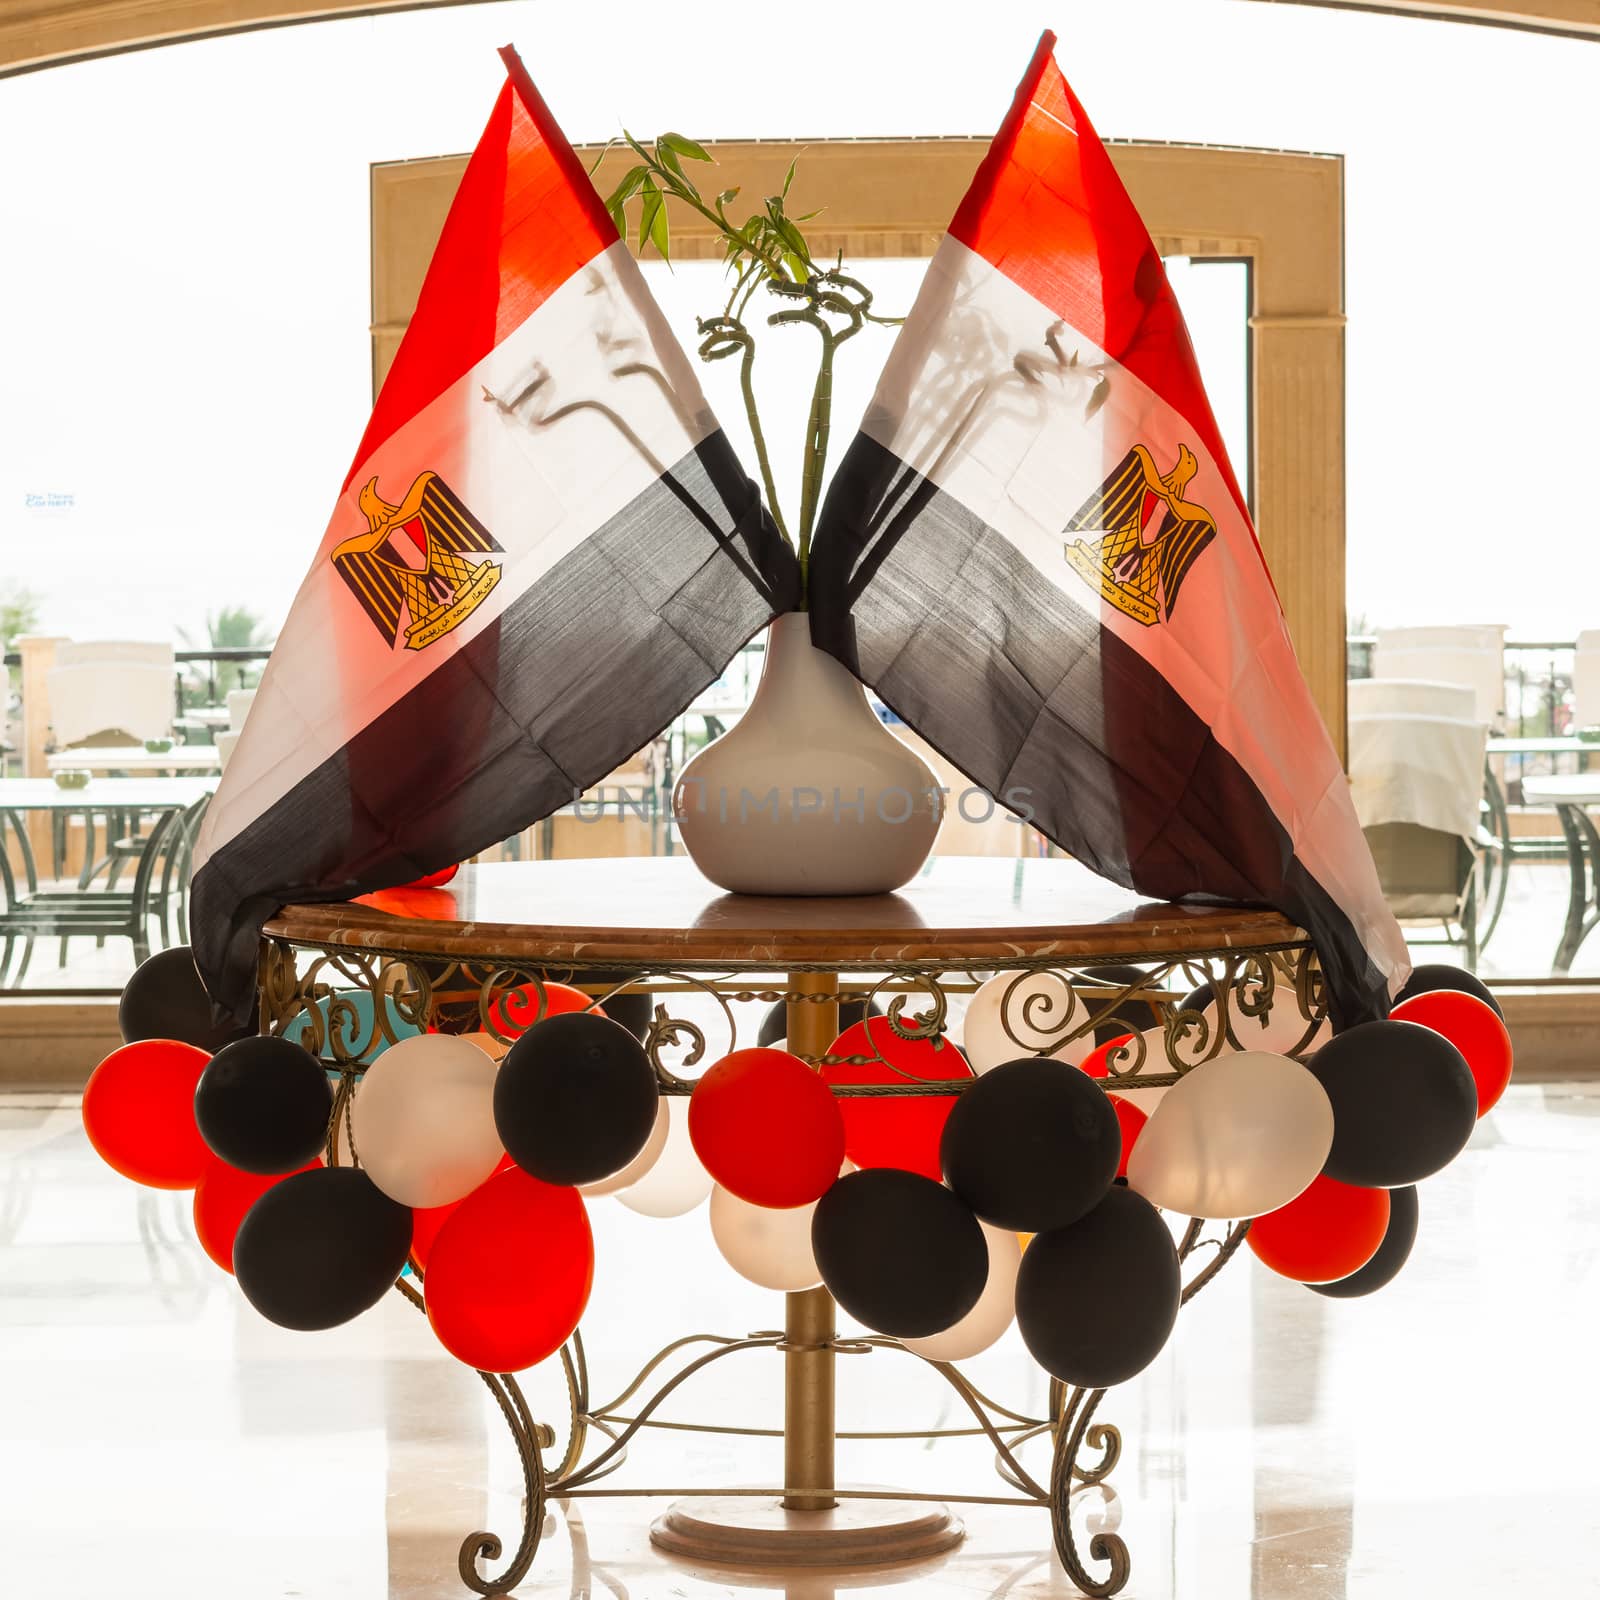 Egyptian flags in backlight, around colored balloons, in a hotel lobby